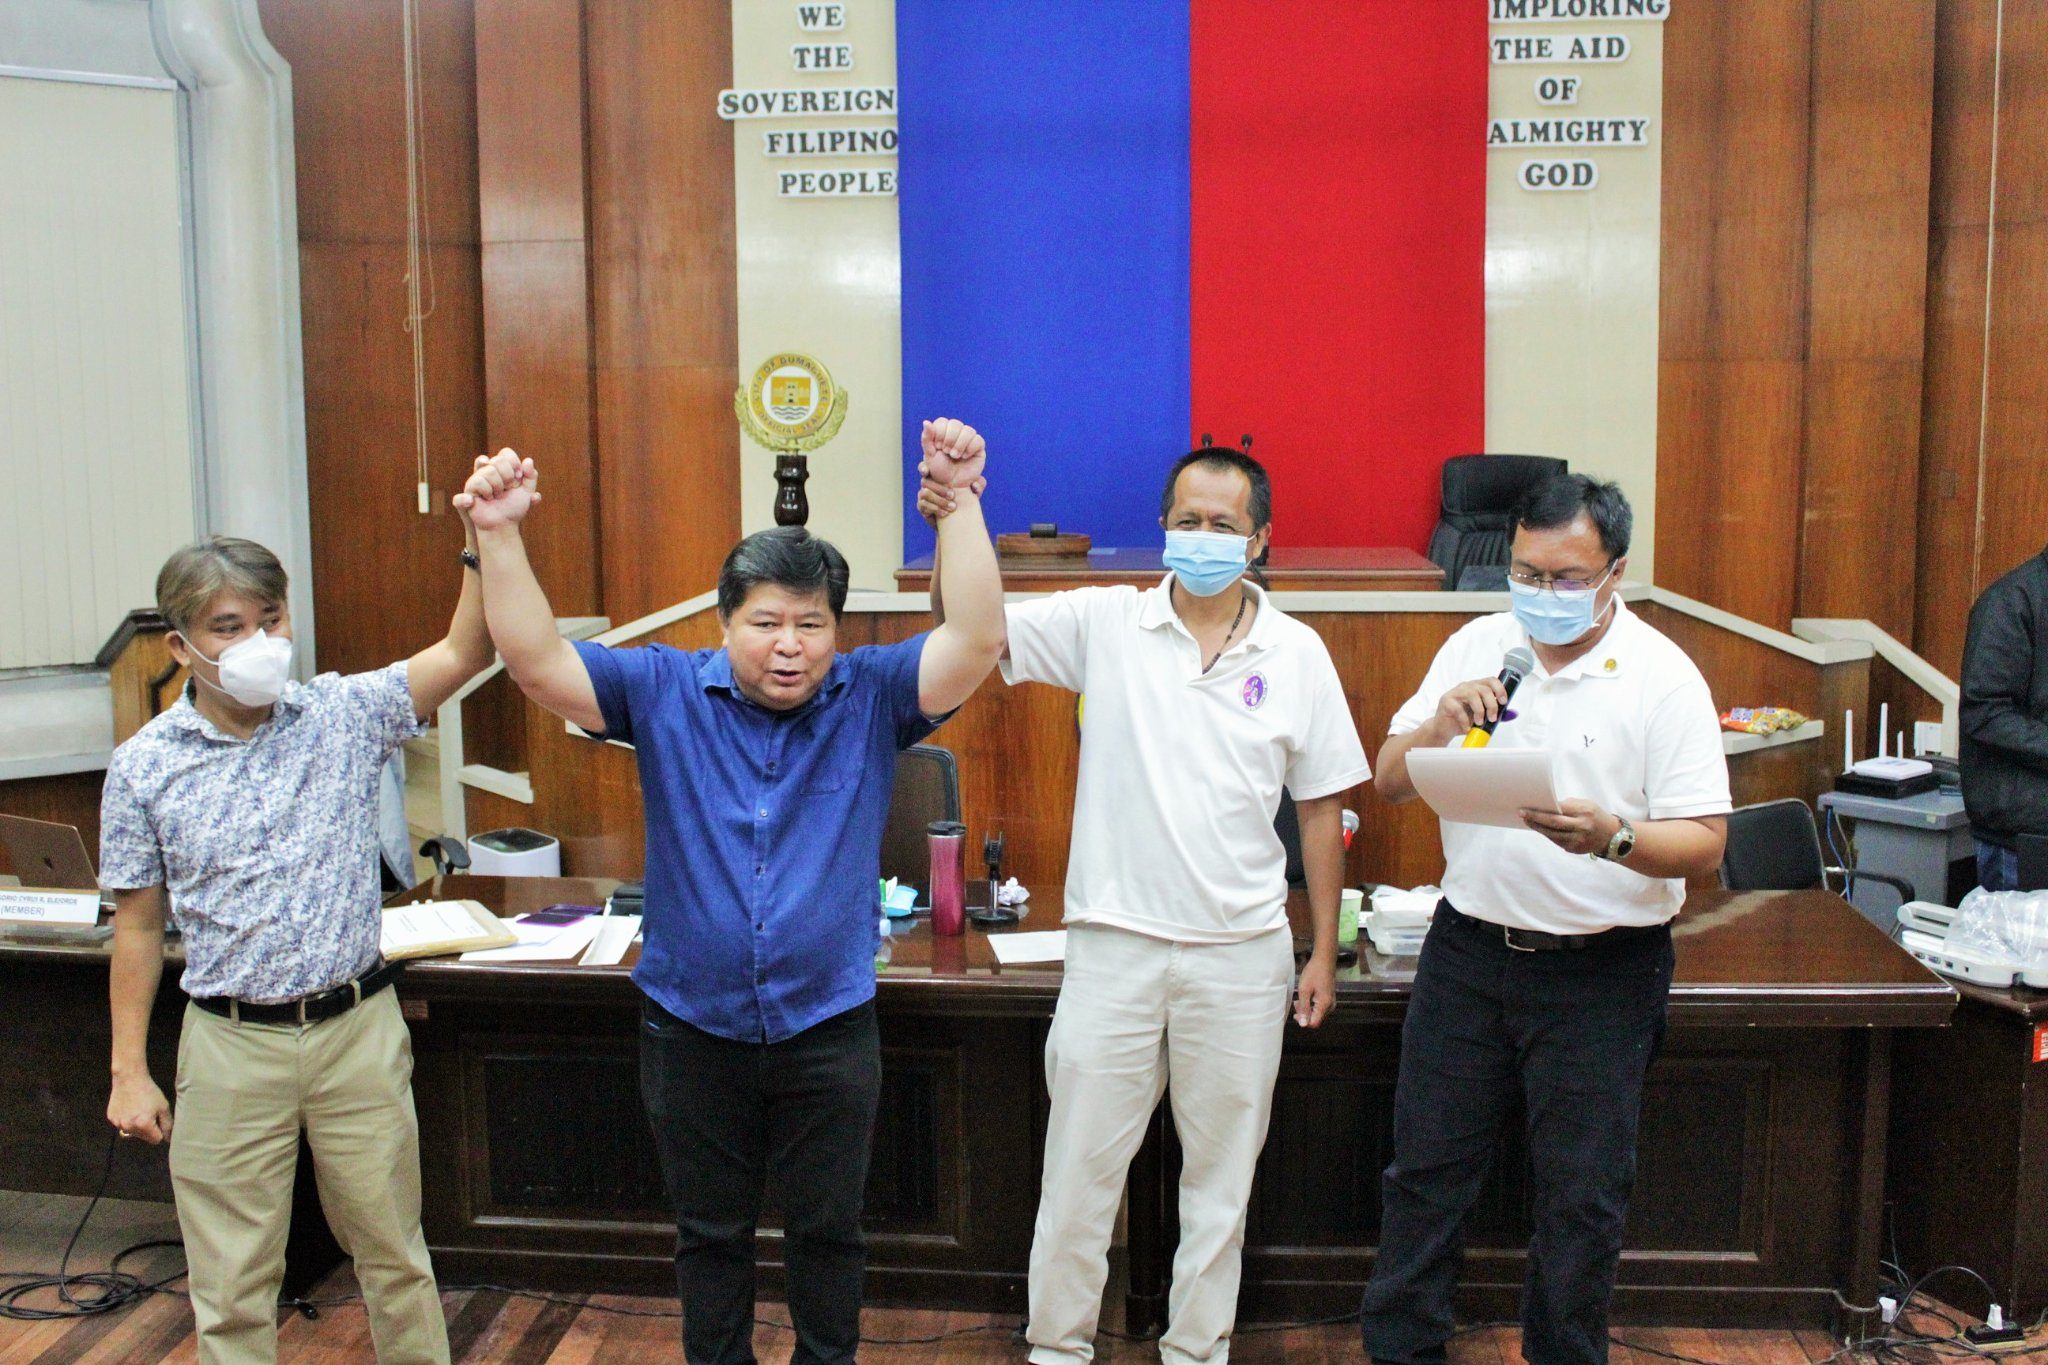 Dumaguete Mayor Remollo wins third term, opposition takes city council